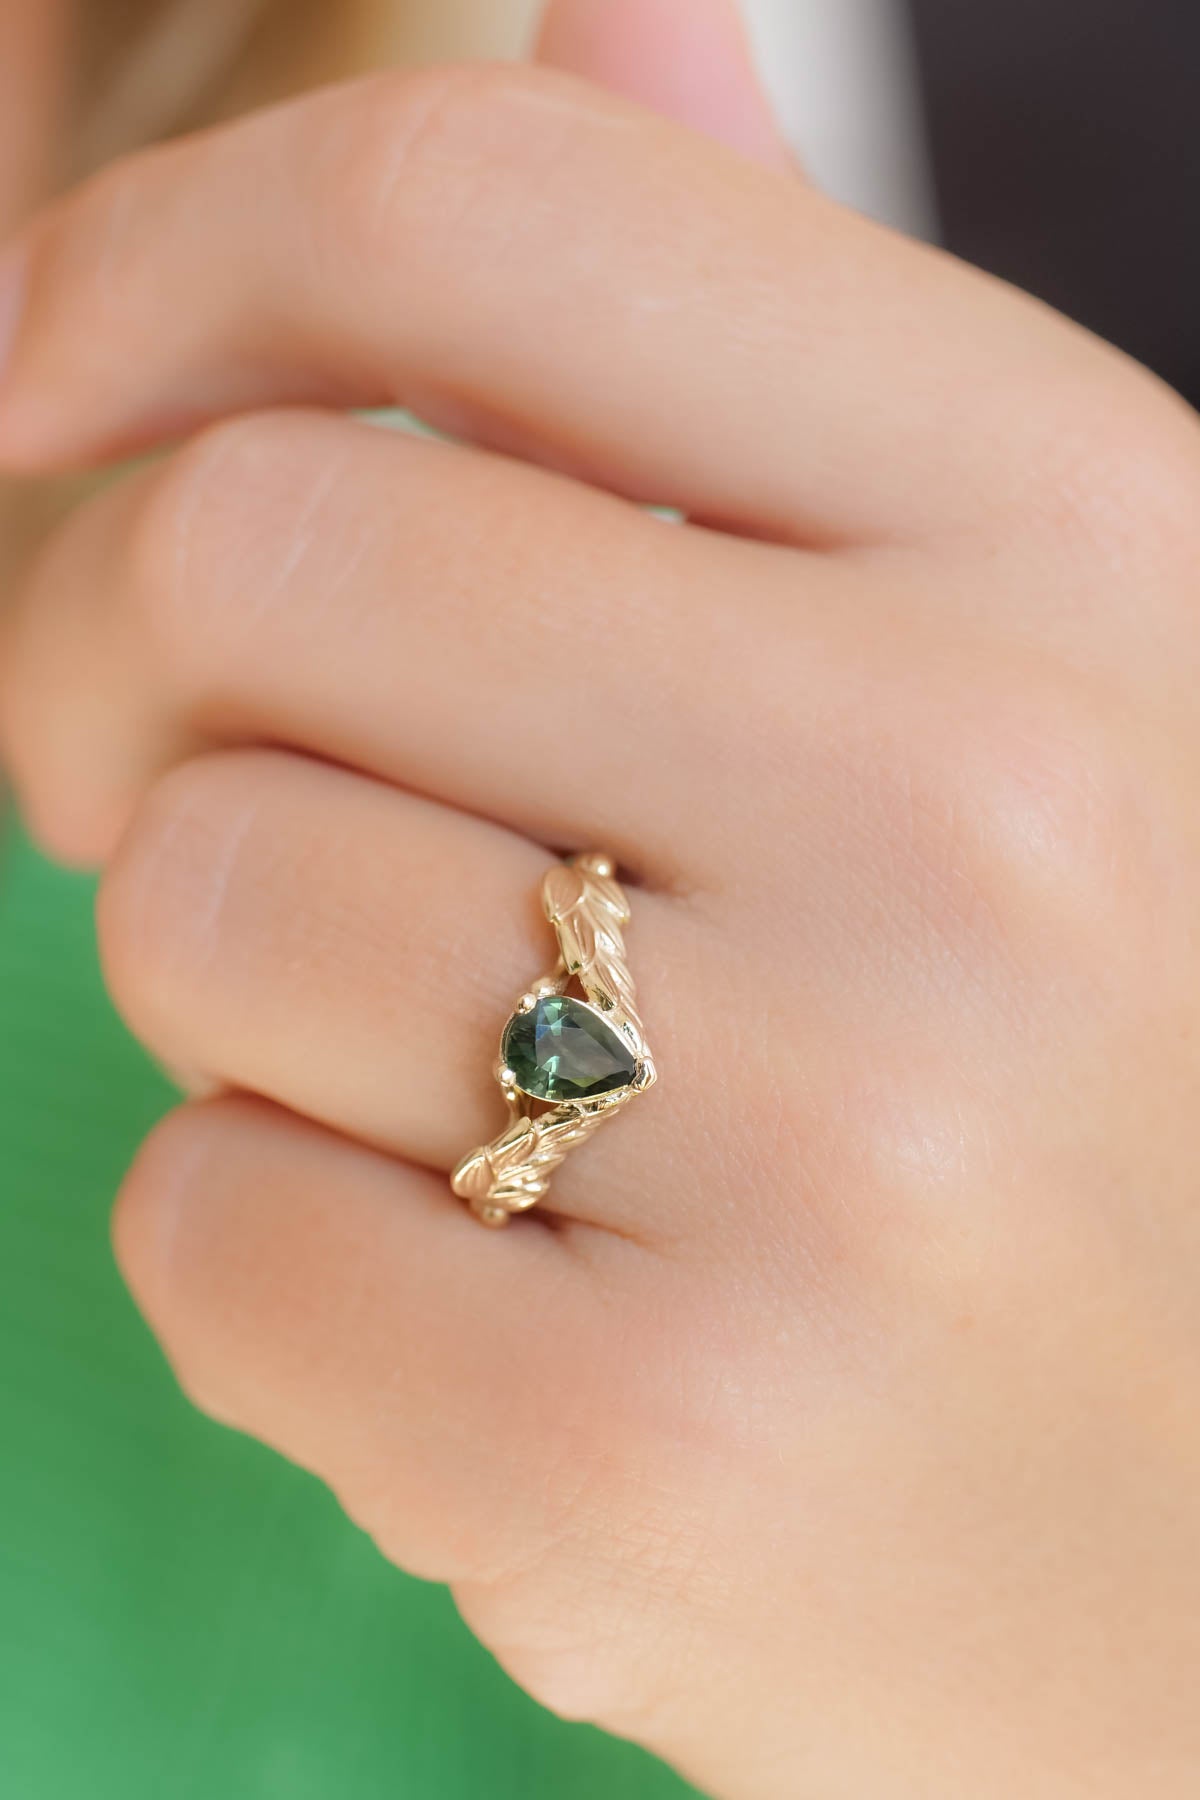 Moss Agate Engagement Ring Meaning - EricaJewels